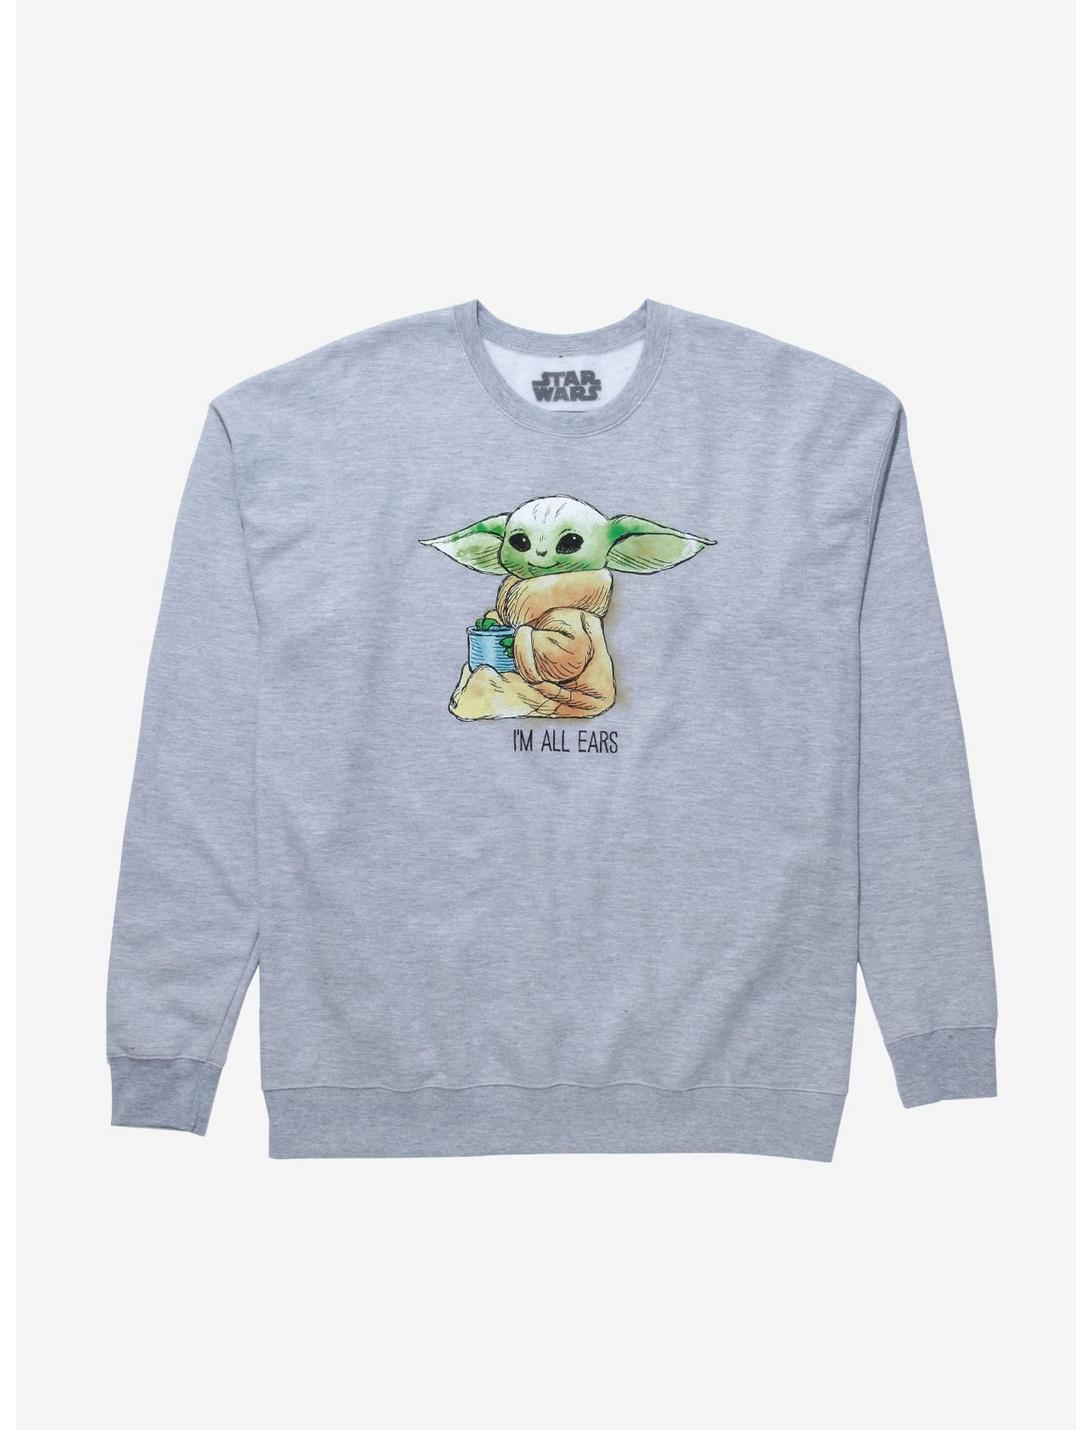 Star Wars The Mandalorian The Child All Ears Women's Crewneck - BoxLunch Exclusive, GREY HEATHER, hi-res